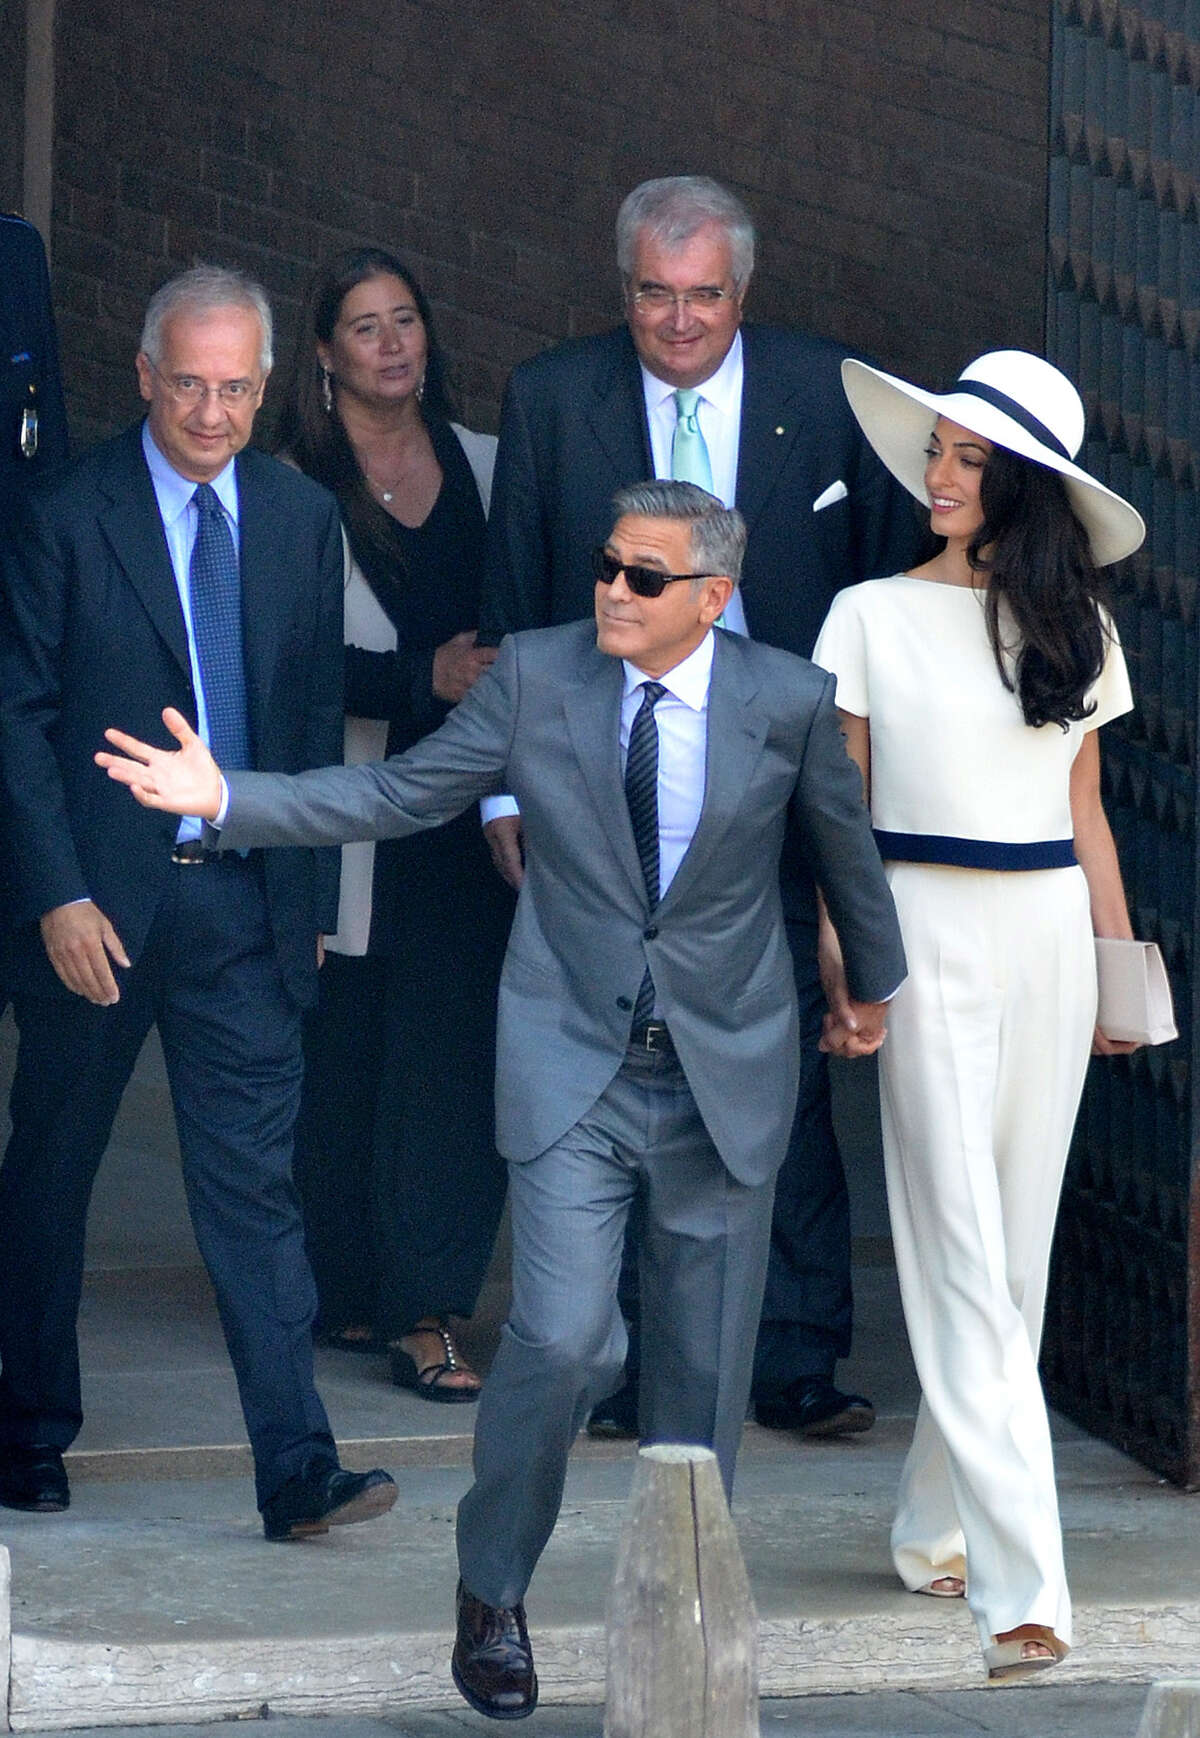 George Clooney and his wife Amal Alamuddin leave the city hall after their civil marriage ceremony performed by former Rome's mayor Walter Veltroni, left, in Venice, Italy, Monday, Sept. 29, 2014. George Clooney married human rights lawyer Amal Alamuddin Saturday, the actor's representative said, out of sight of pursuing paparazzi and adoring crowds. (AP Photo/Luigi Costantini)